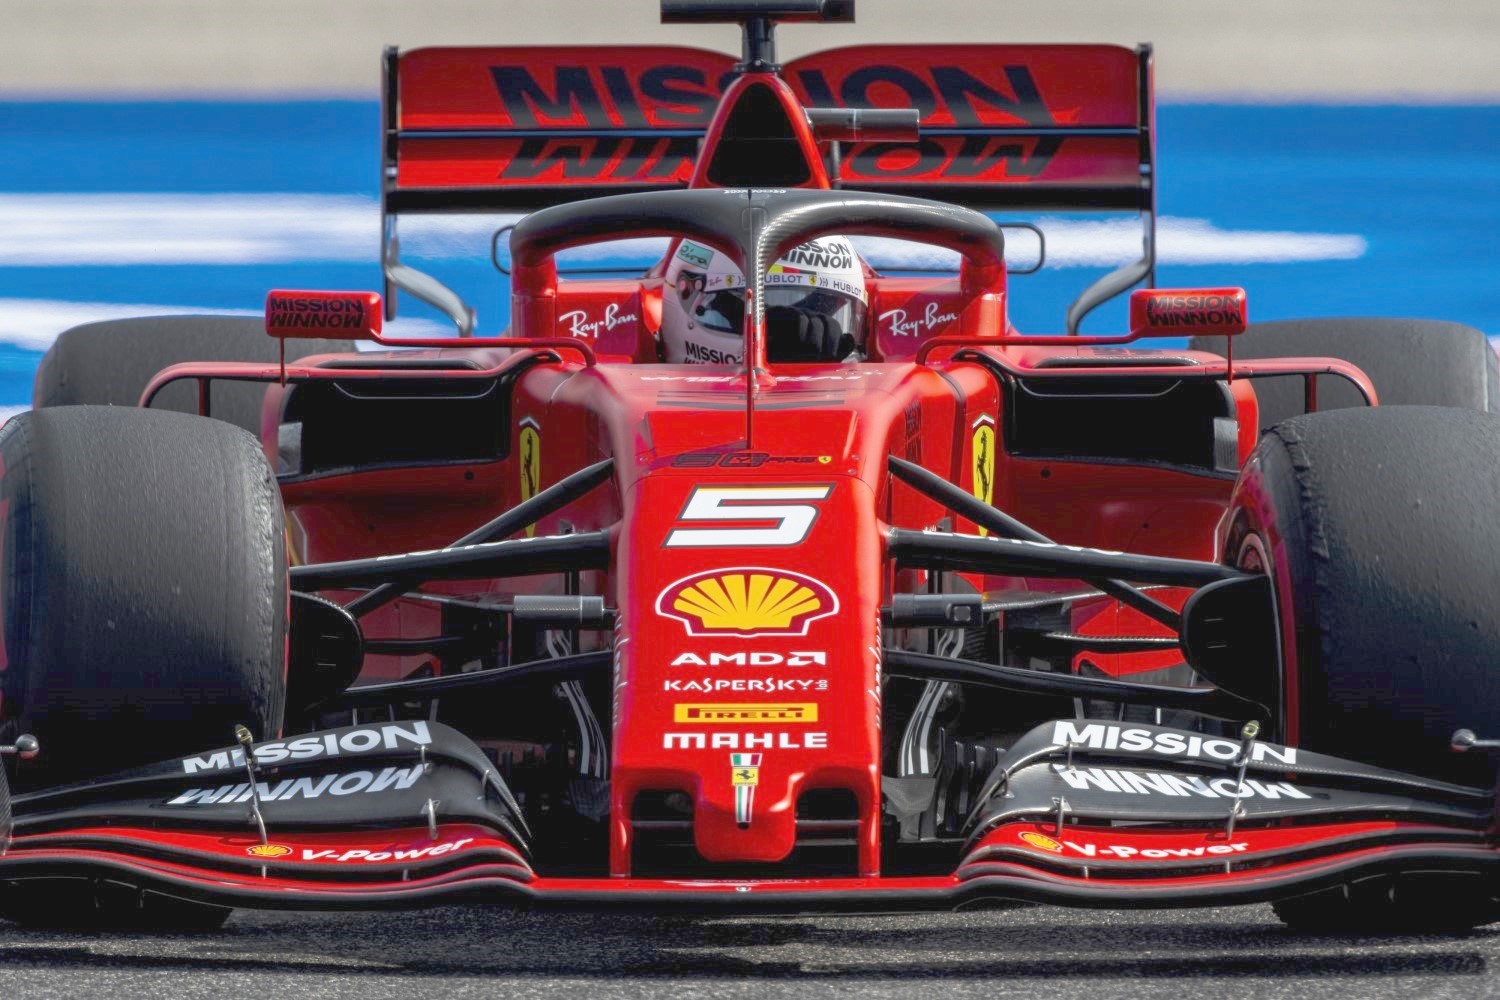 Vettel came close to pole, but came up 0.012s short